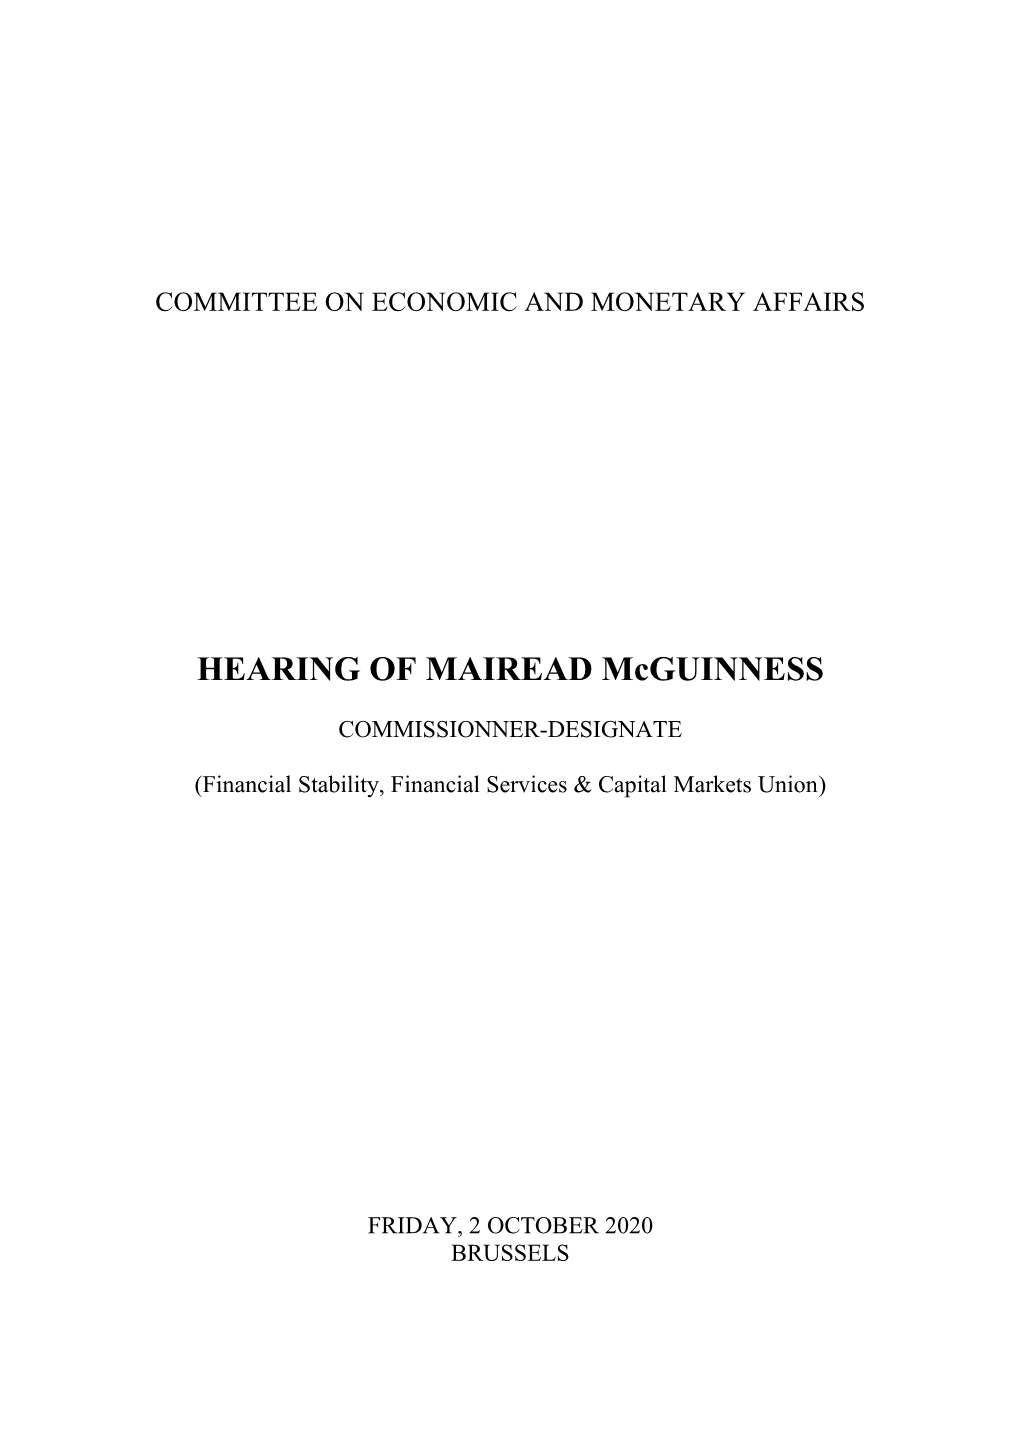 HEARING of MAIREAD Mcguinness